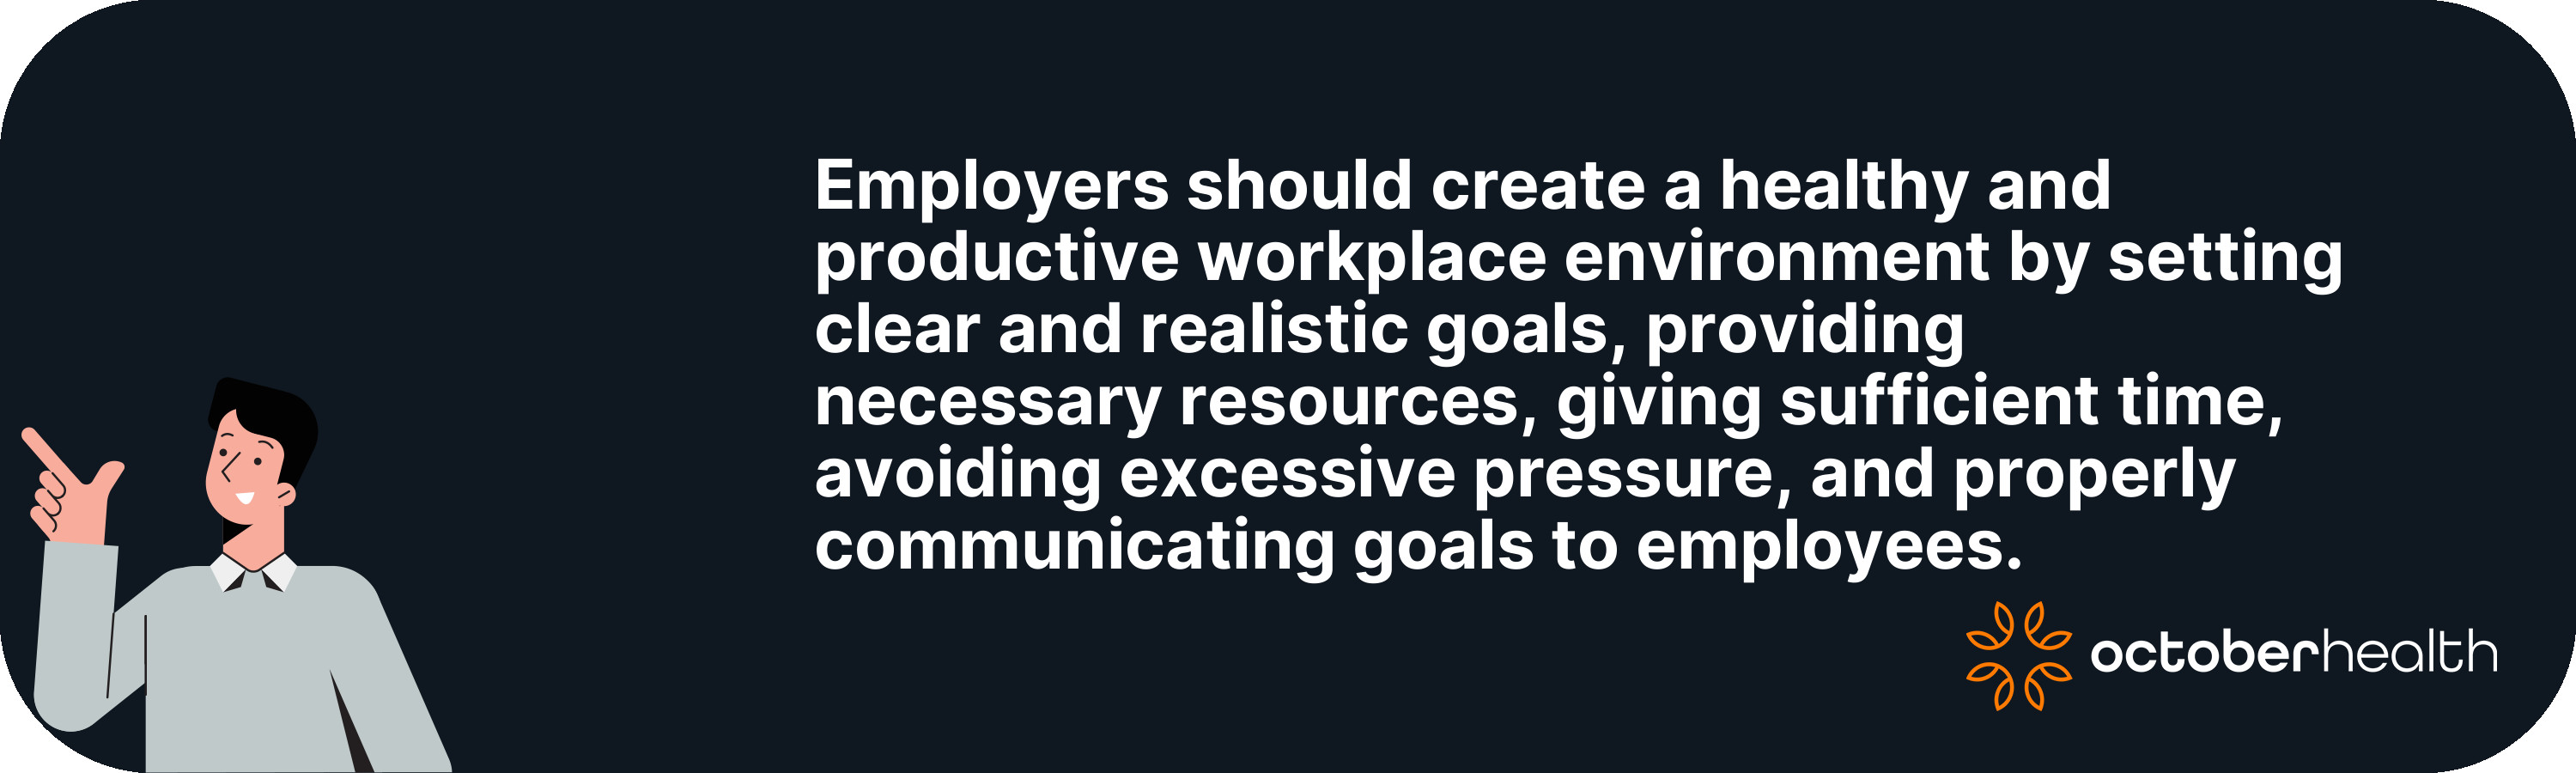 Employers should create a healthy and...